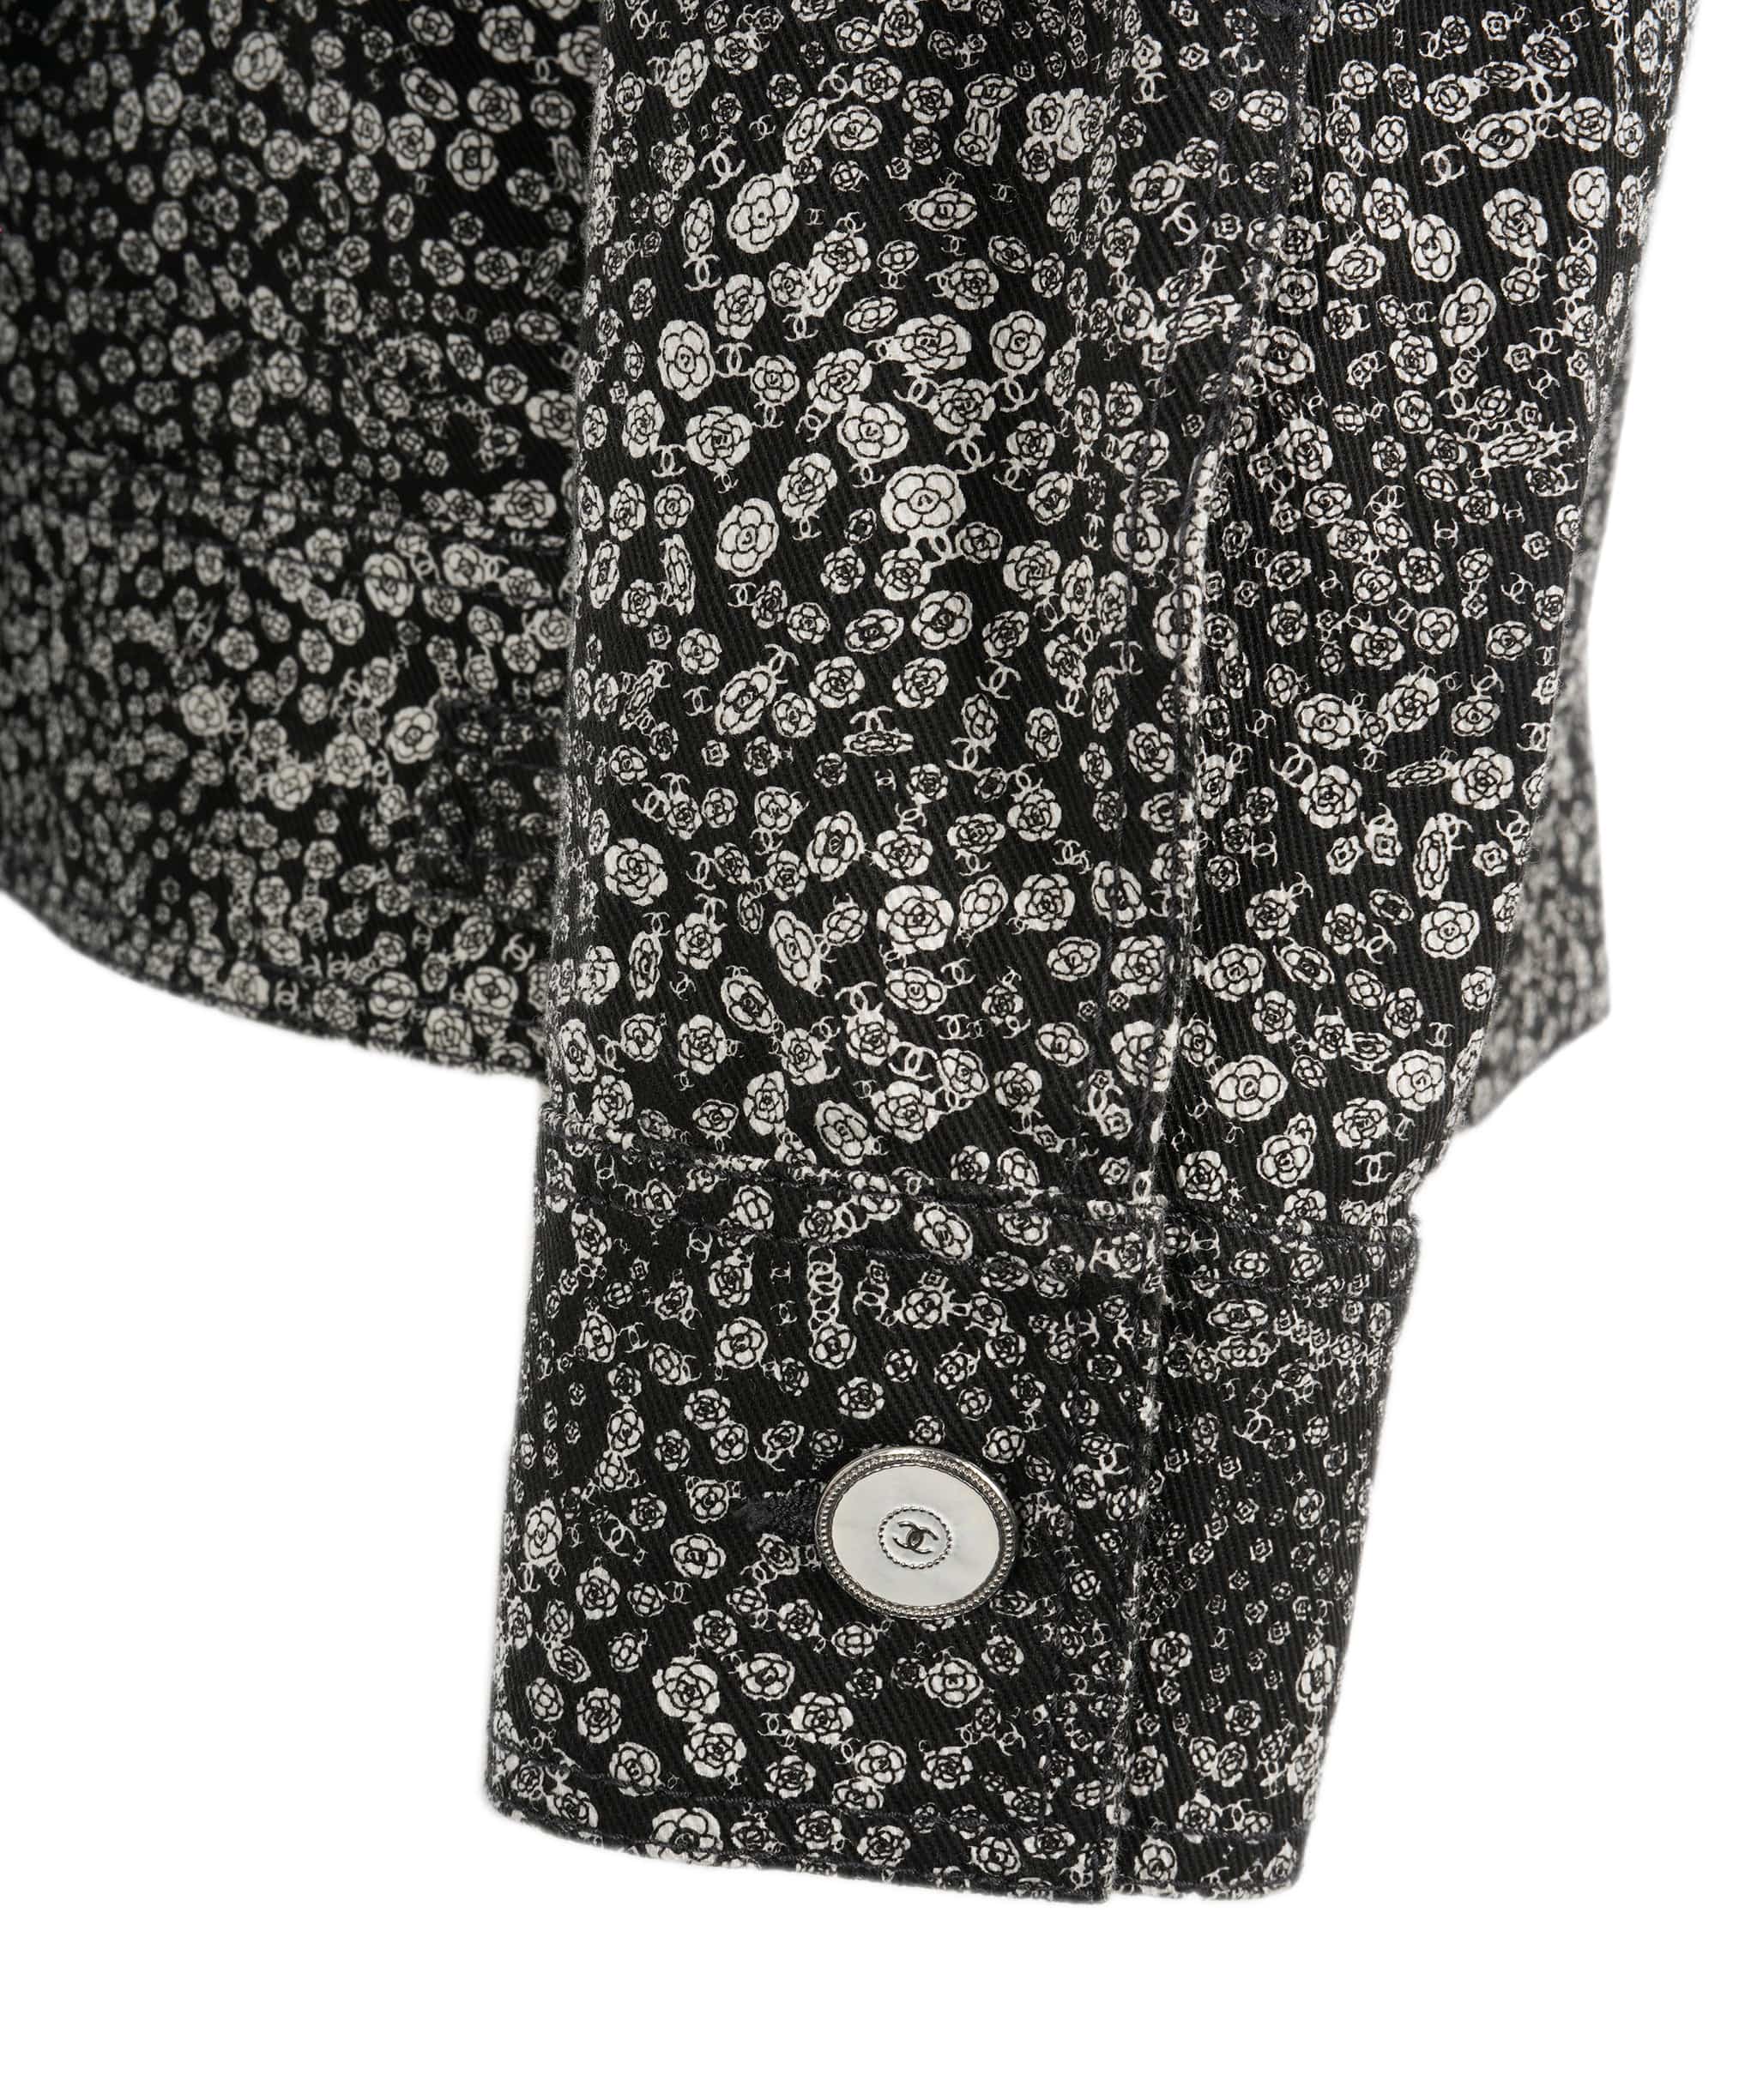 Chanel Chanel denim jacket with flowers AVC1967